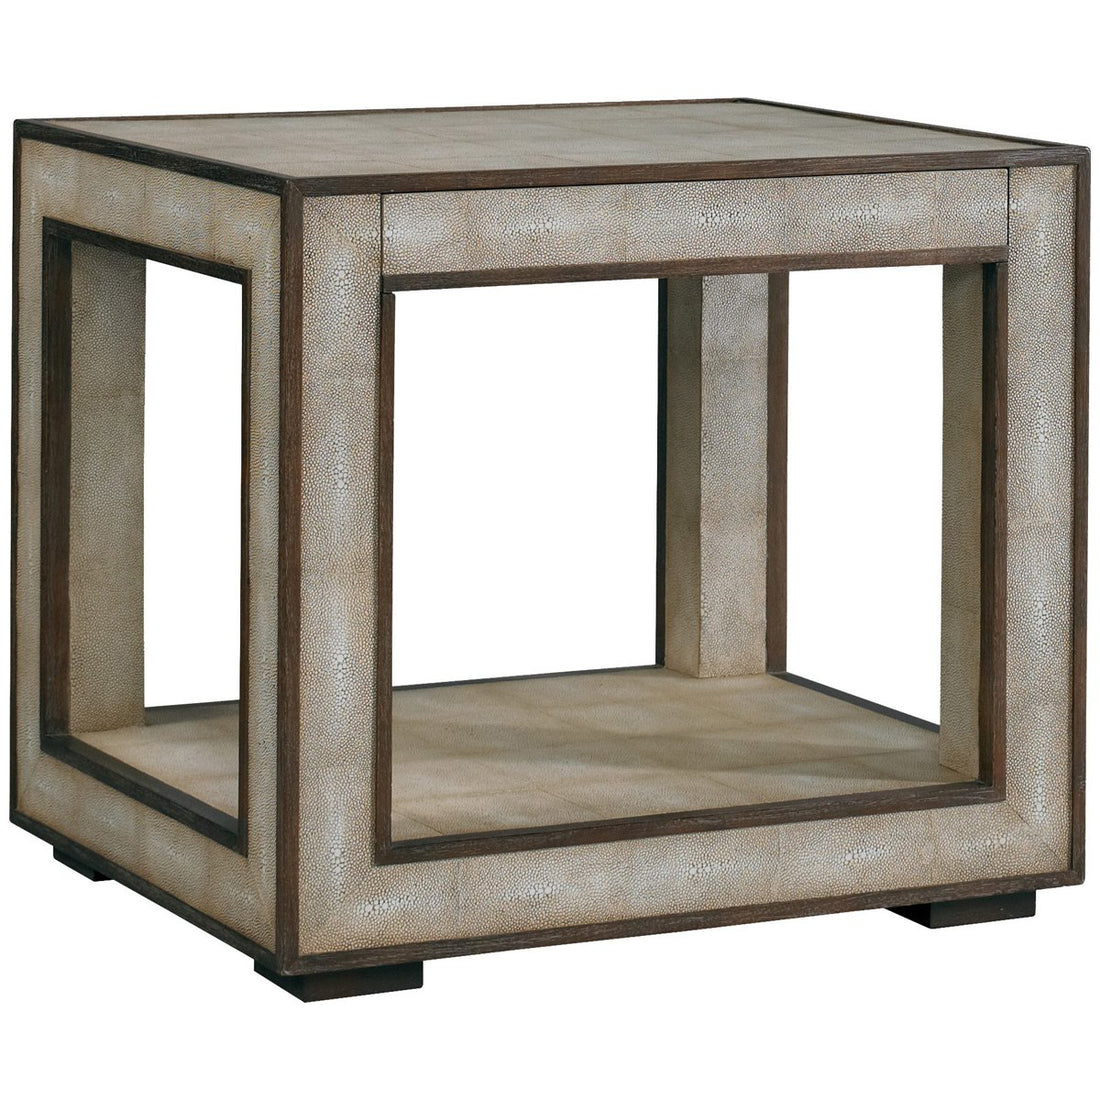 Lillian August Haven End Table